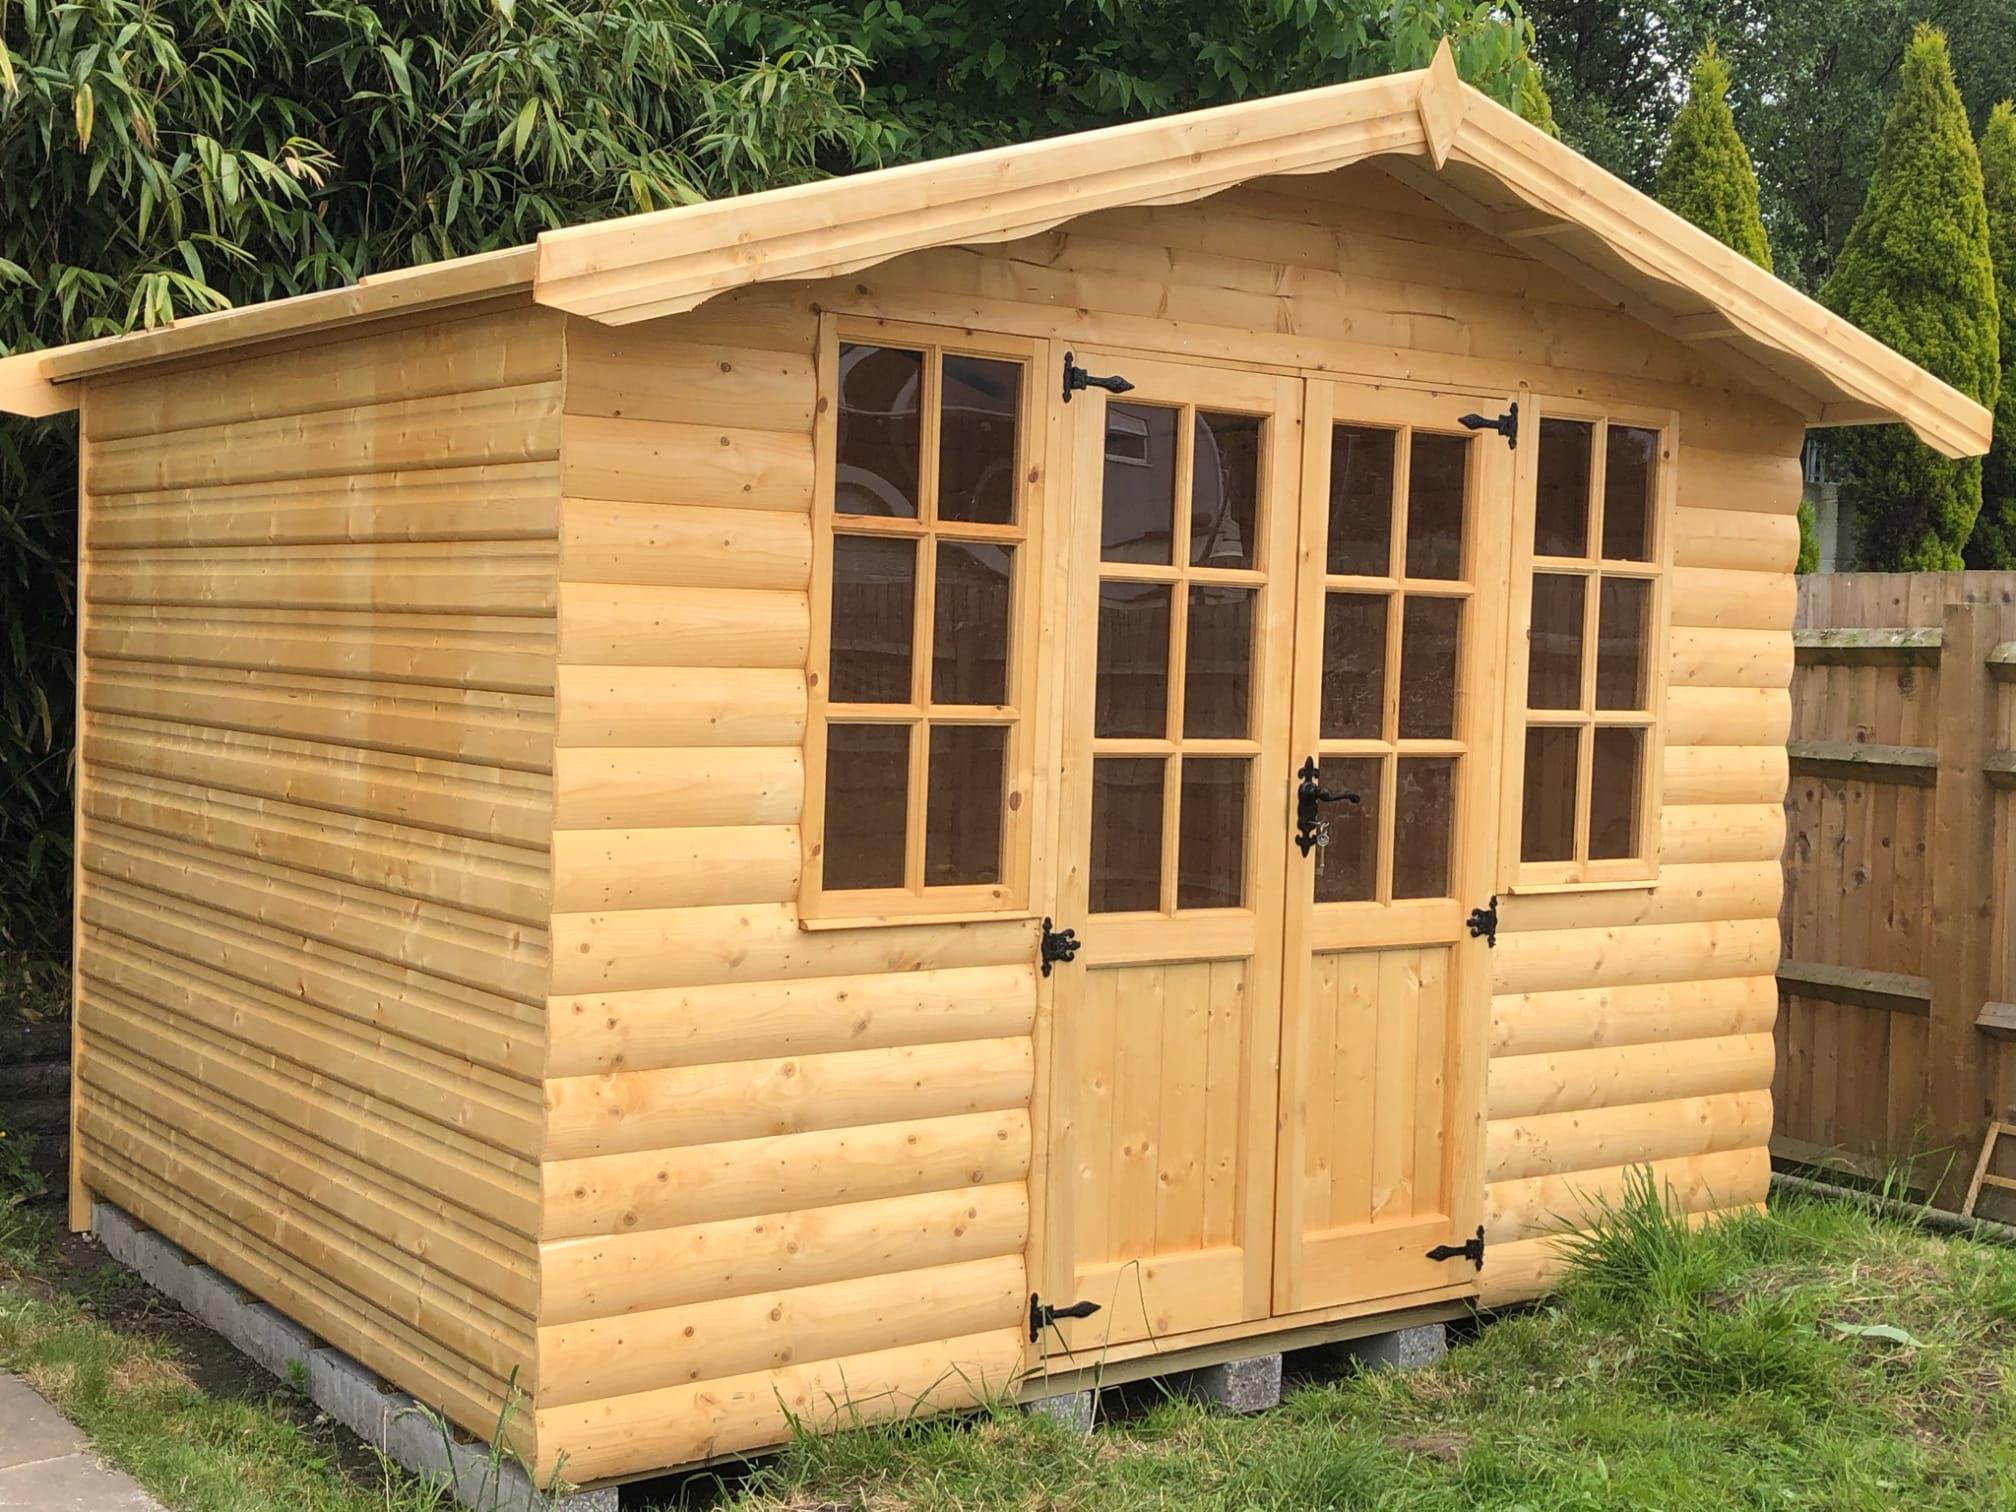 Images Seven Sisters Sawmill (Sheds) Ltd